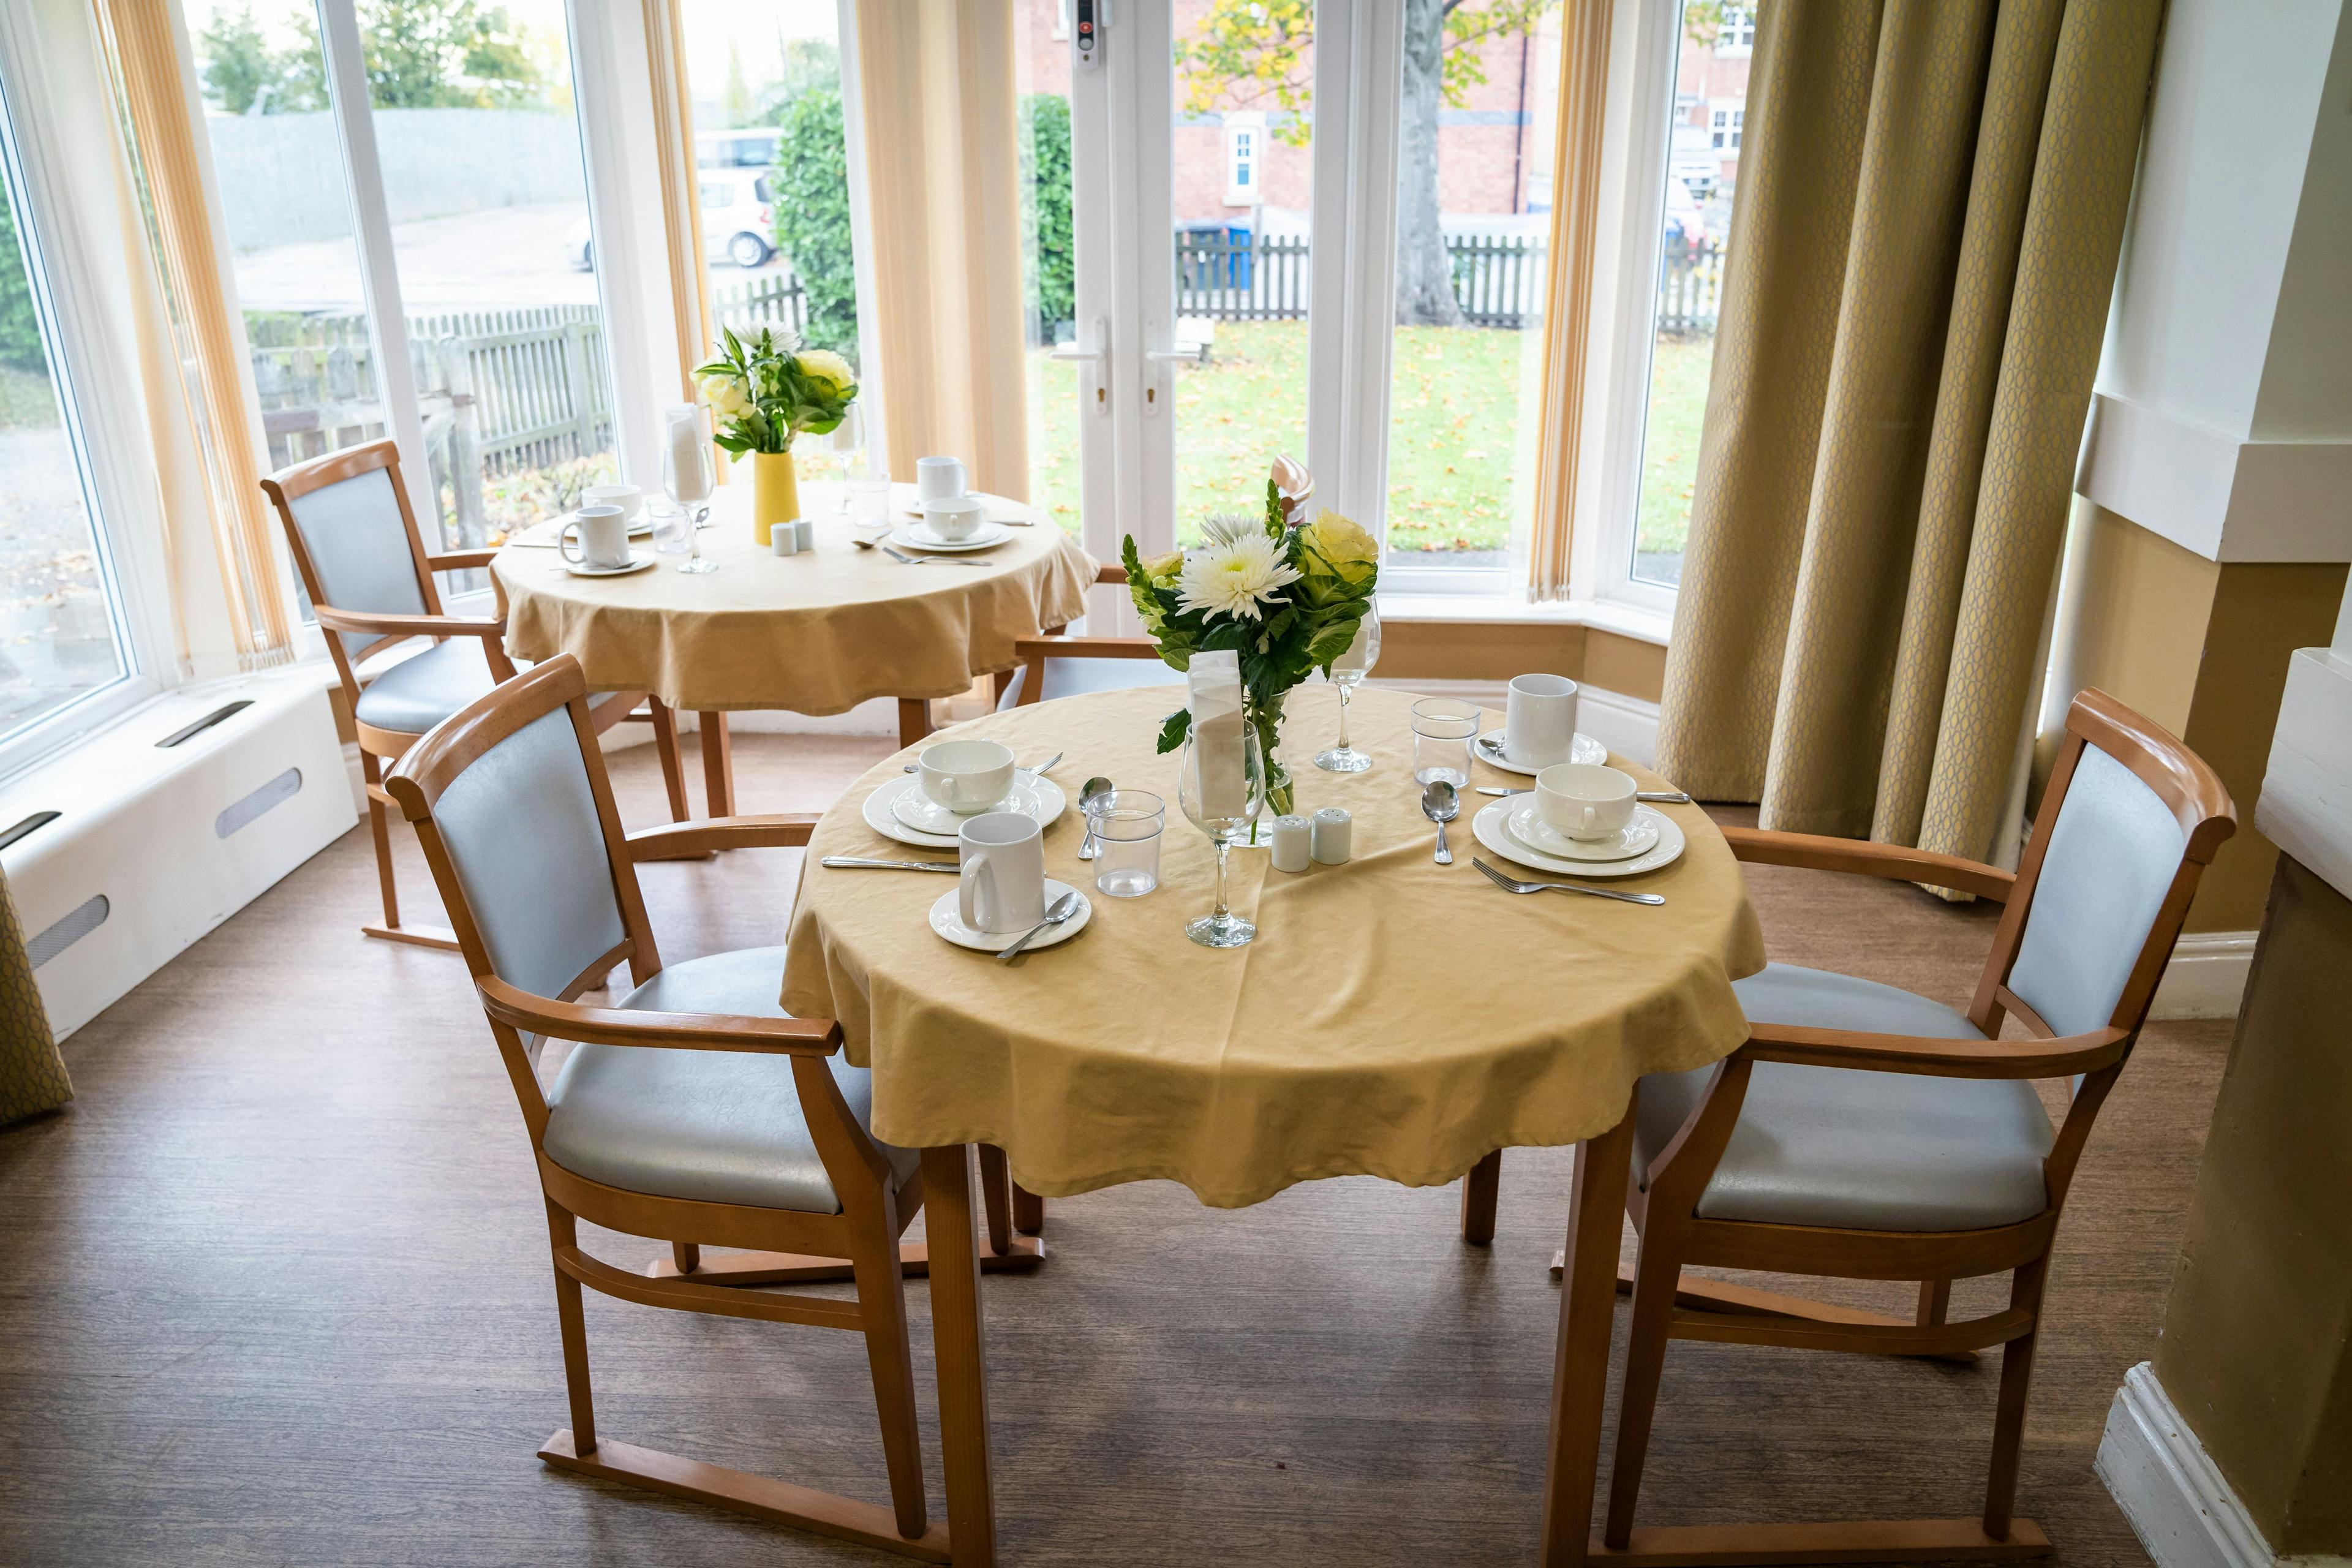 Dining Area at The Beeches Residential Care Home, Northfield, Birmingham